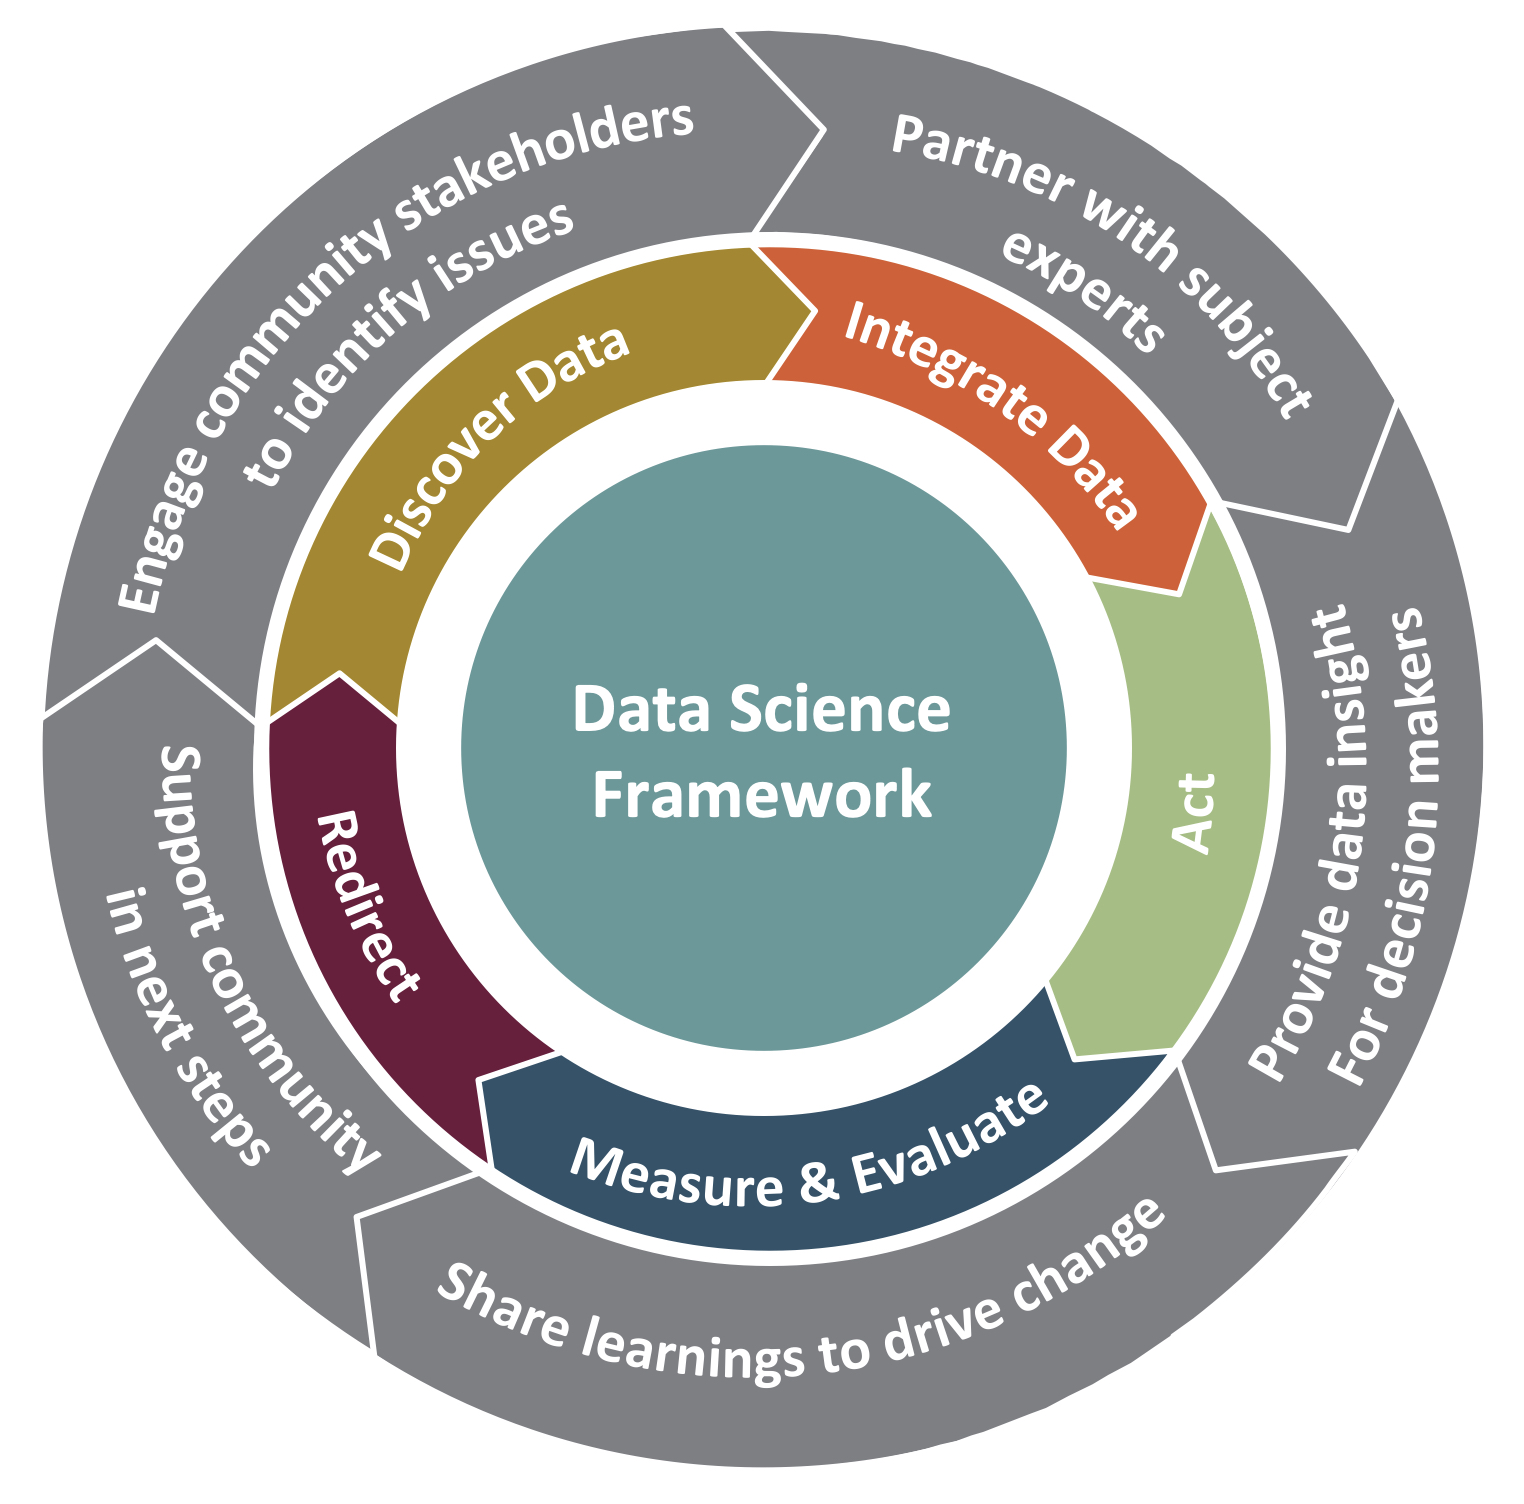 Community Learning Through Data Driven Discovery Process